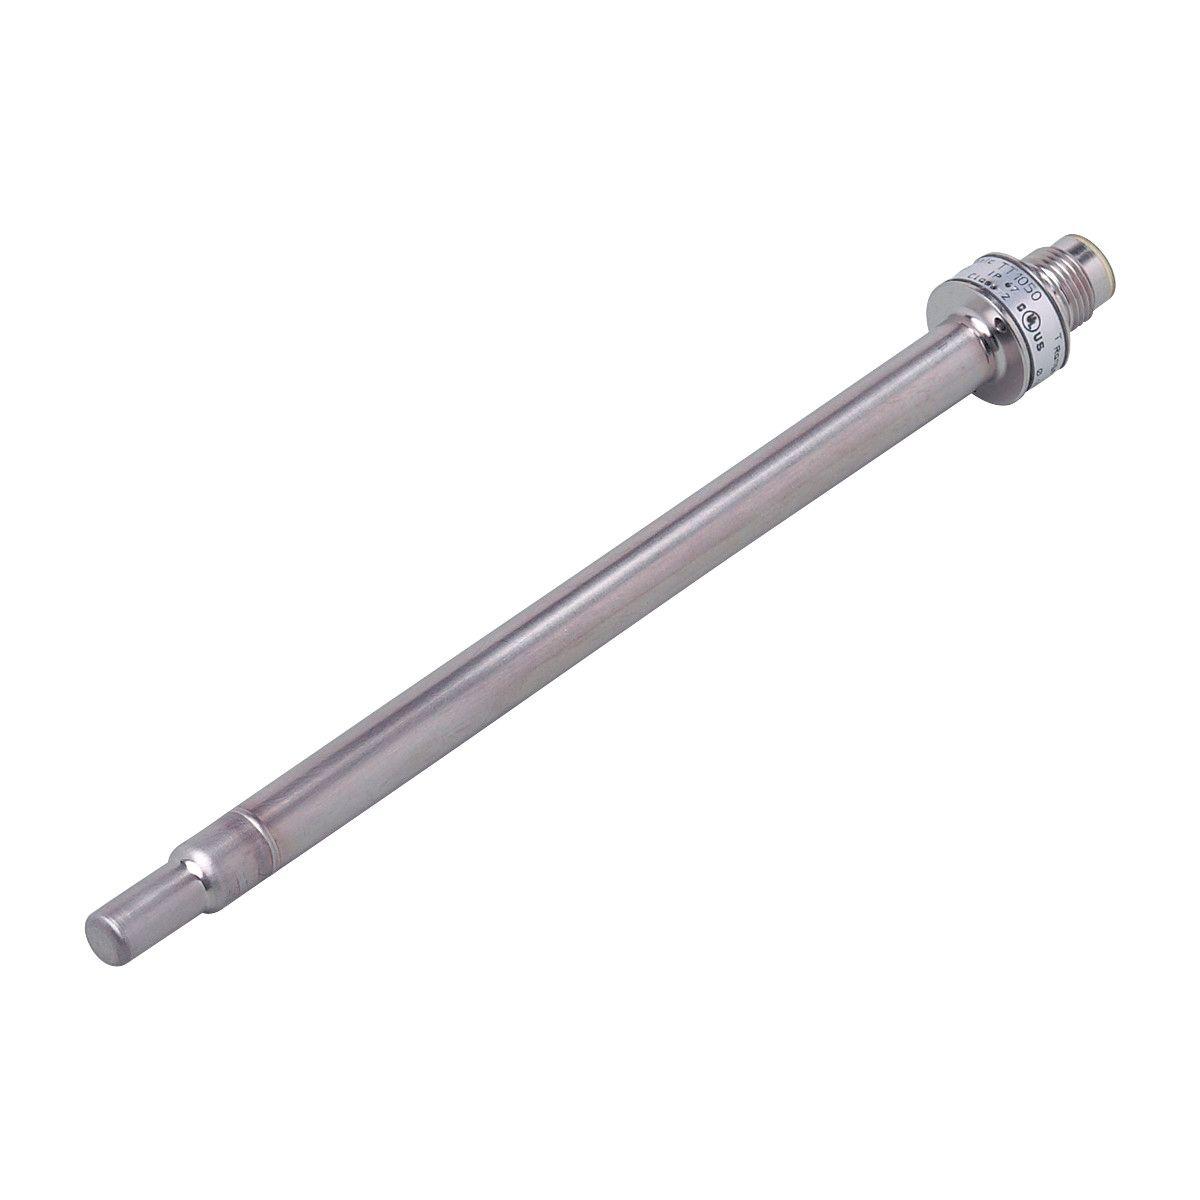 ifm Electronic TT1081 Temperature probe sensor, Precise temperature measurement in containers, tanks and pipes, Measuring range: -40...150 °C -40...302 °F, Installation length EL [mm]: 160, System: gold-plated contacts, Measuring element: 1 x Pt 100; (to DIN EN 60751, class A)